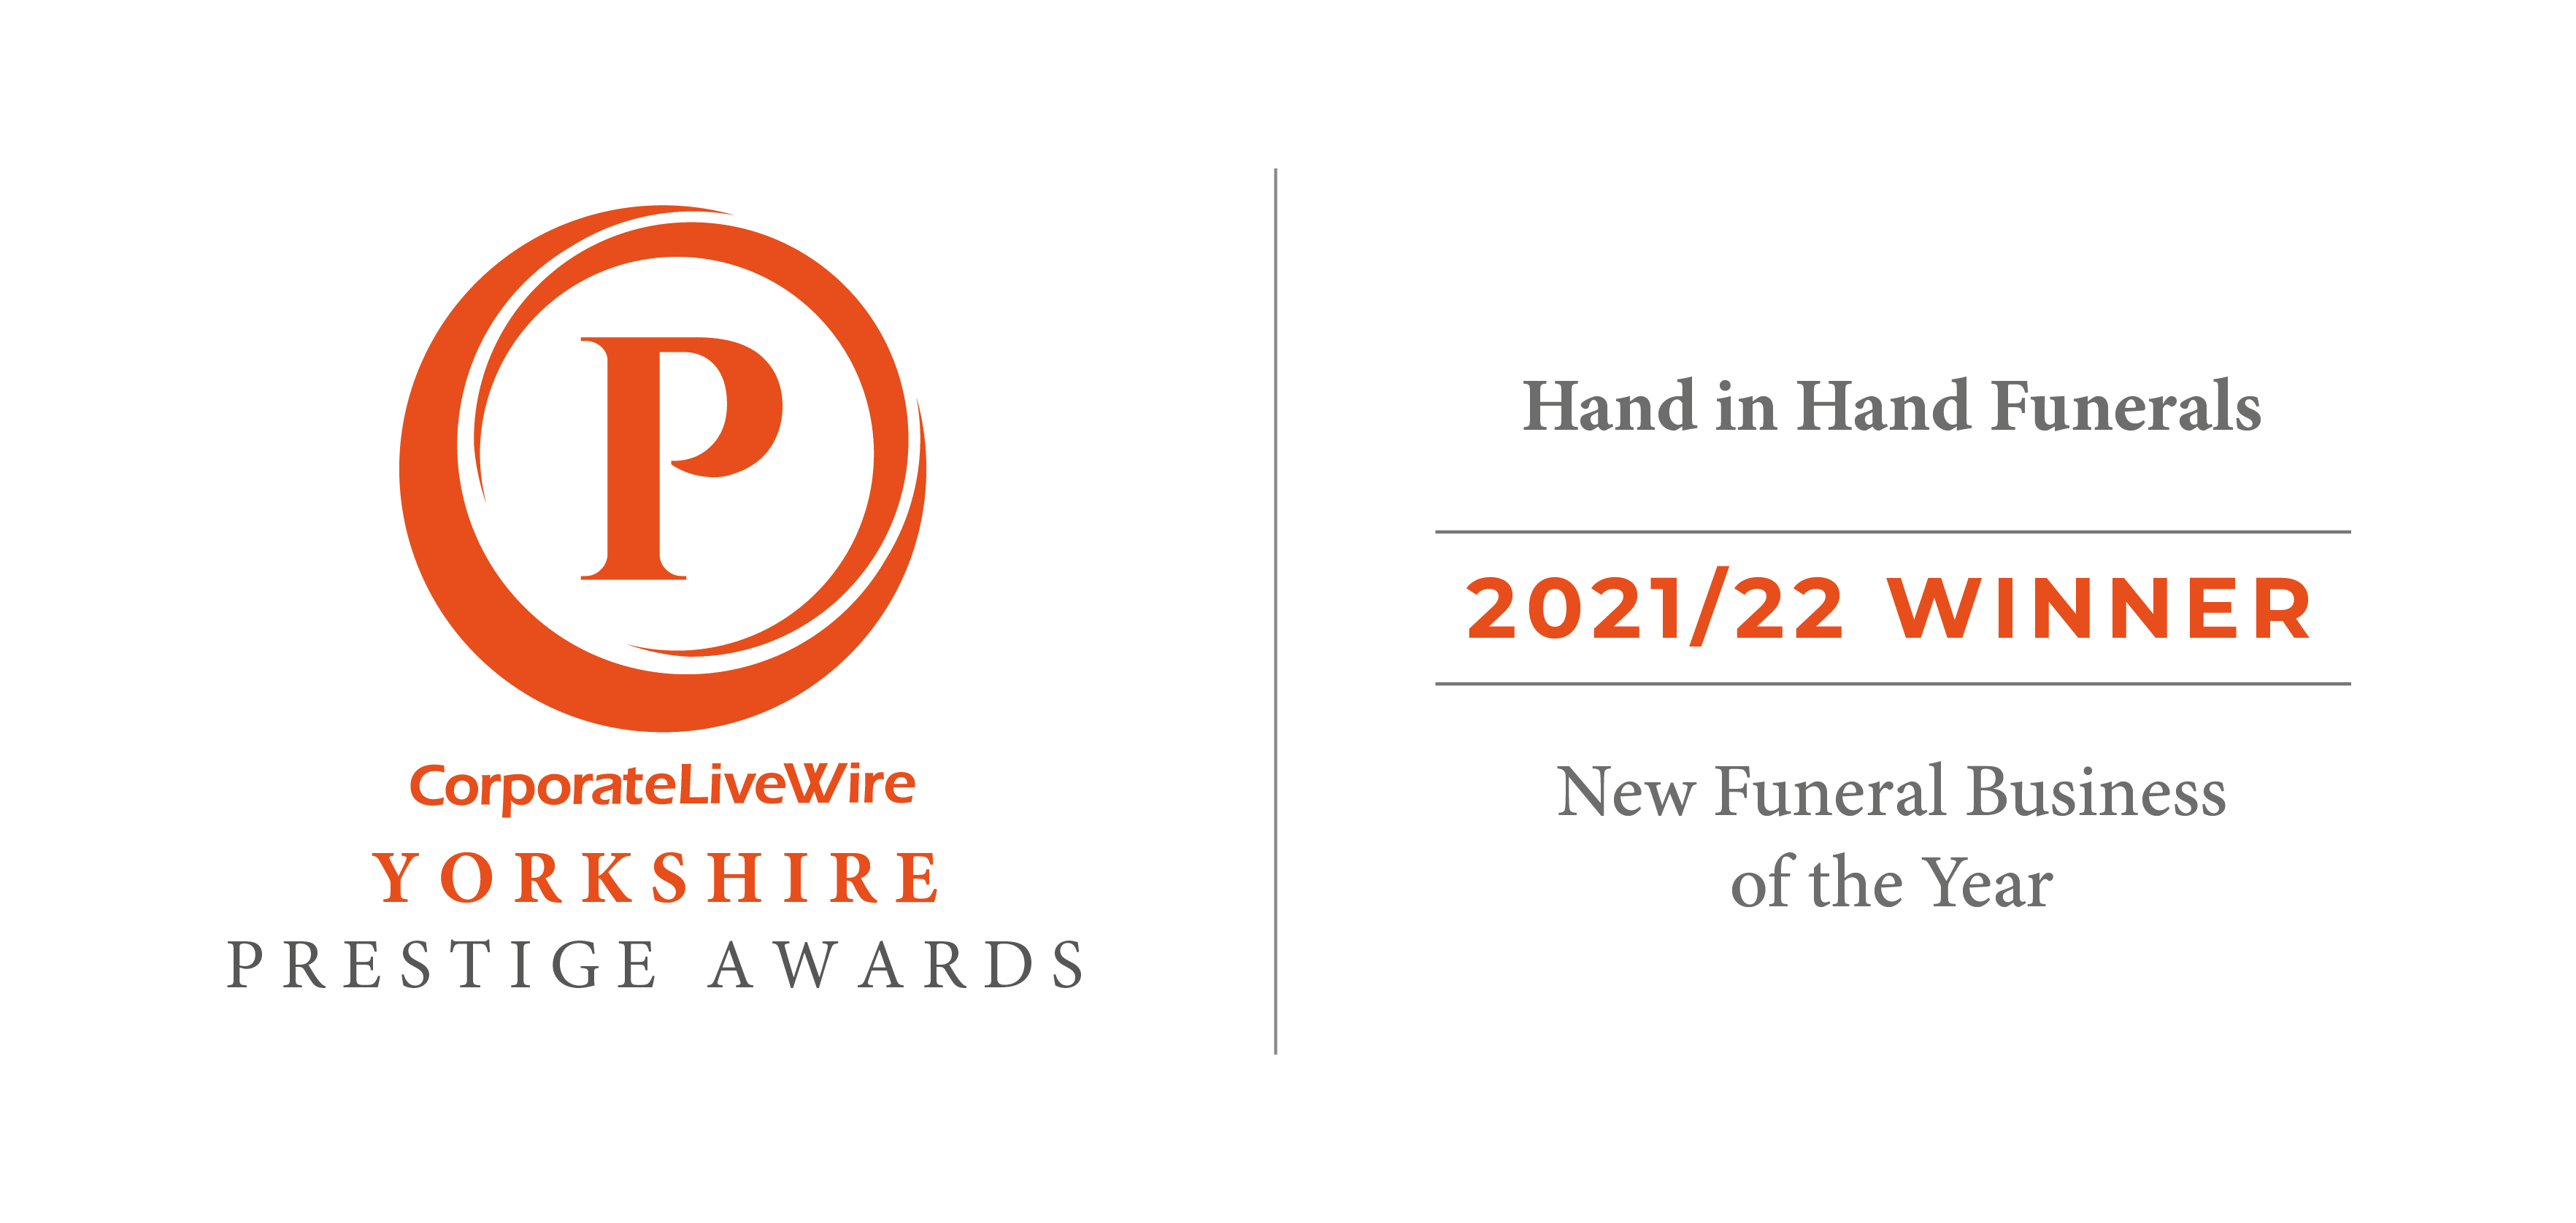 New Funeral Business of the Year